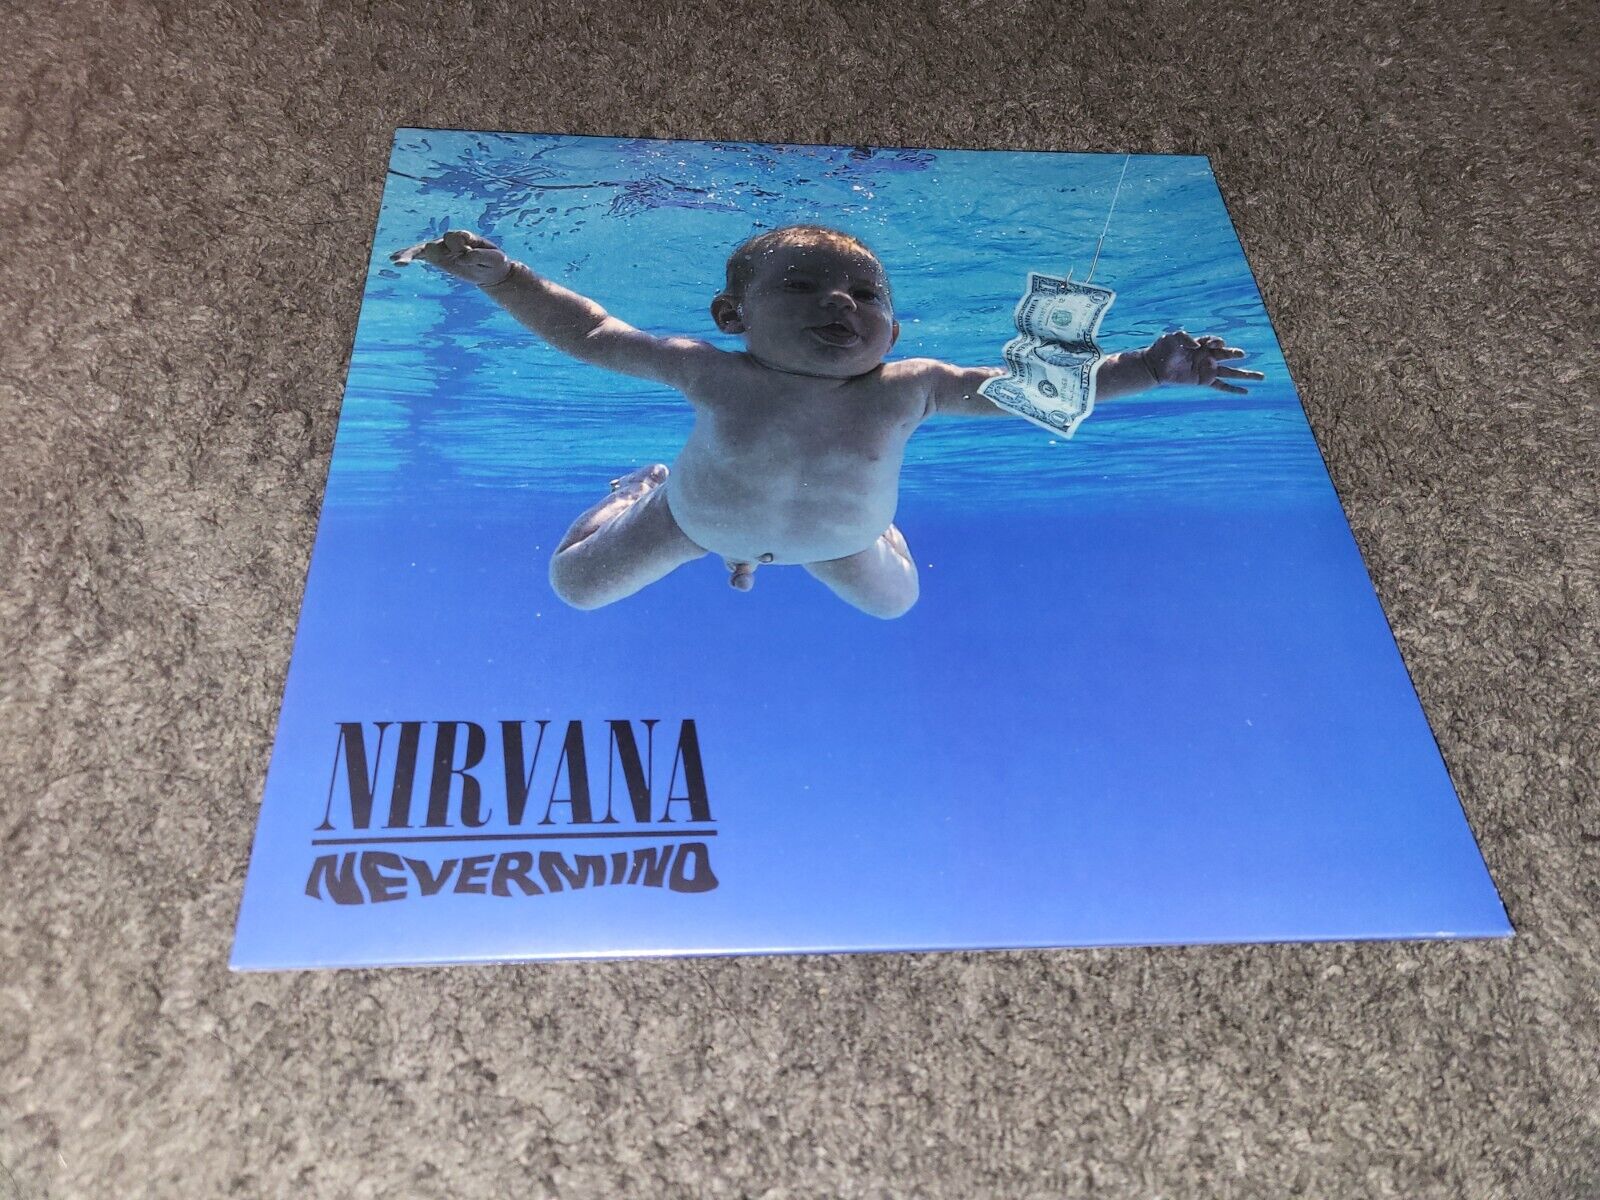 Nirvana Nevermind LP New Sealed Vinyl Reissue Sealed Cobain Grohl